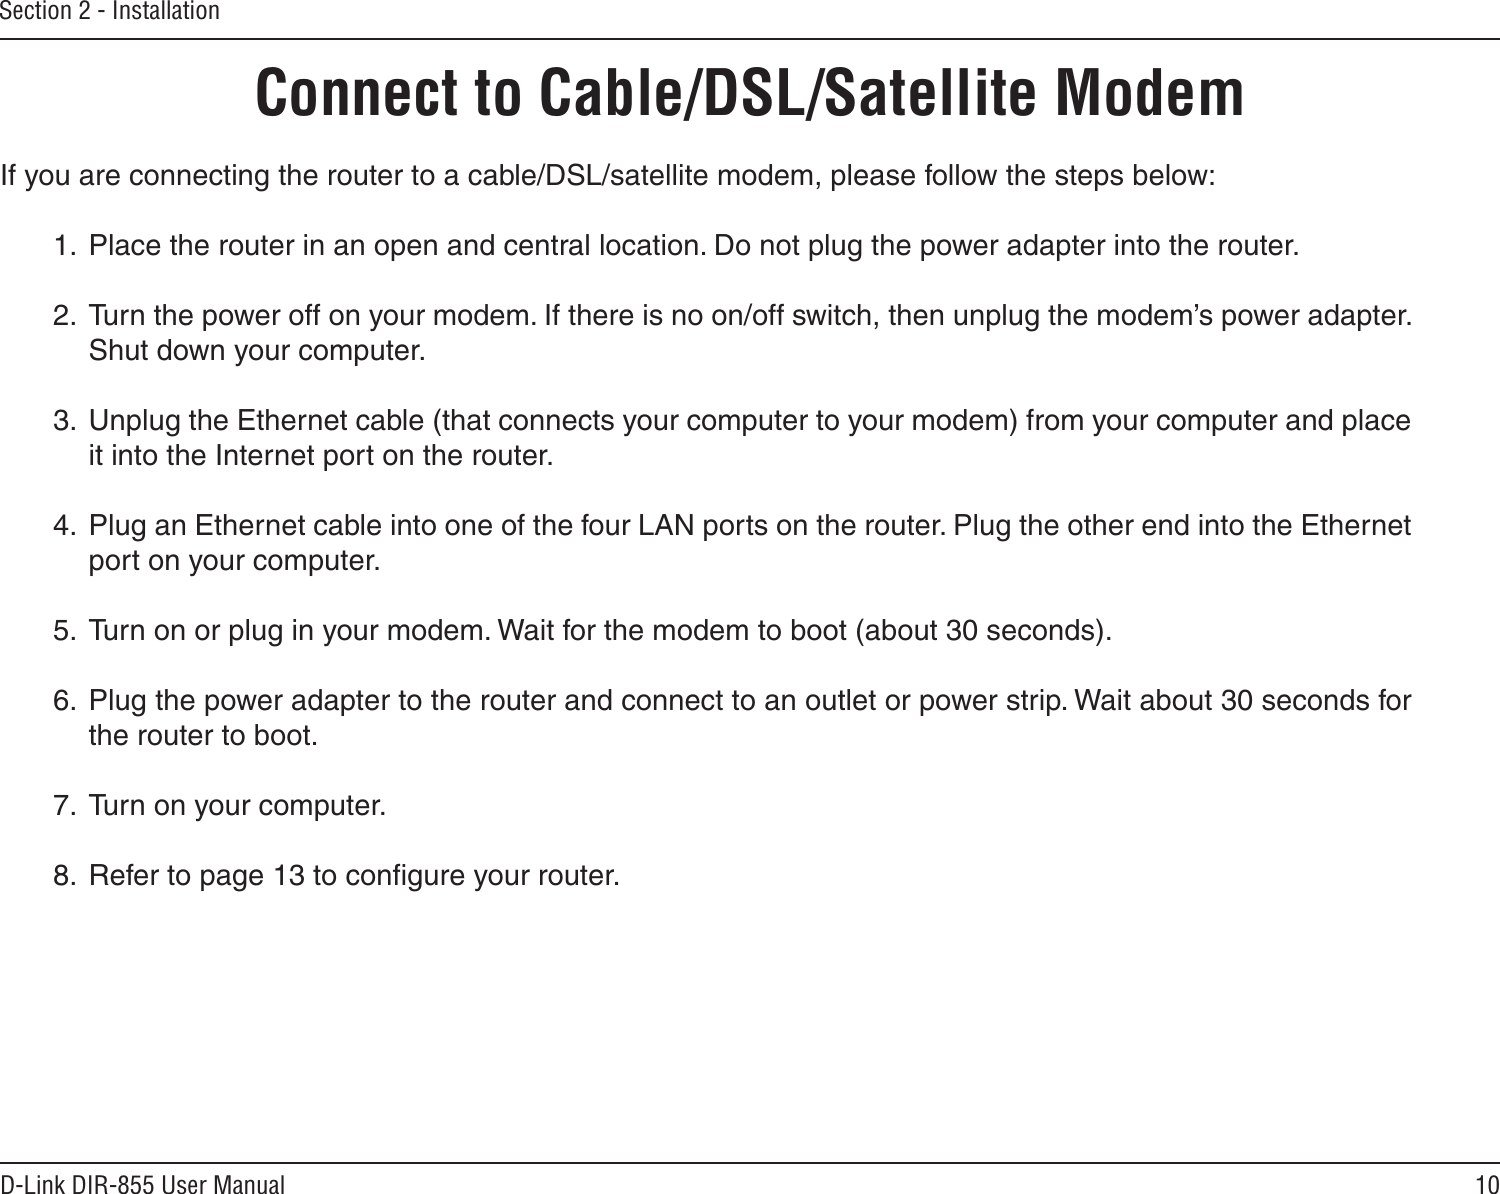 10D-Link DIR-855 User ManualSection 2 - InstallationIf you are connecting the router to a cable/DSL/satellite modem, please follow the steps below:1.  Place the router in an open and central location. Do not plug the power adapter into the router.2.  Turn the power off on your modem. If there is no on/off switch, then unplug the modem’s power adapter. Shut down your computer.3.  Unplug the Ethernet cable (that connects your computer to your modem) from your computer and place it into the Internet port on the router.4.  Plug an Ethernet cable into one of the four LAN ports on the router. Plug the other end into the Ethernet port on your computer.5.  Turn on or plug in your modem. Wait for the modem to boot (about 30 seconds).6.  Plug the power adapter to the router and connect to an outlet or power strip. Wait about 30 seconds for the router to boot.7.  Turn on your computer.8.  Refer to page 13 to conﬁgure your router.Connect to Cable/DSL/Satellite Modem